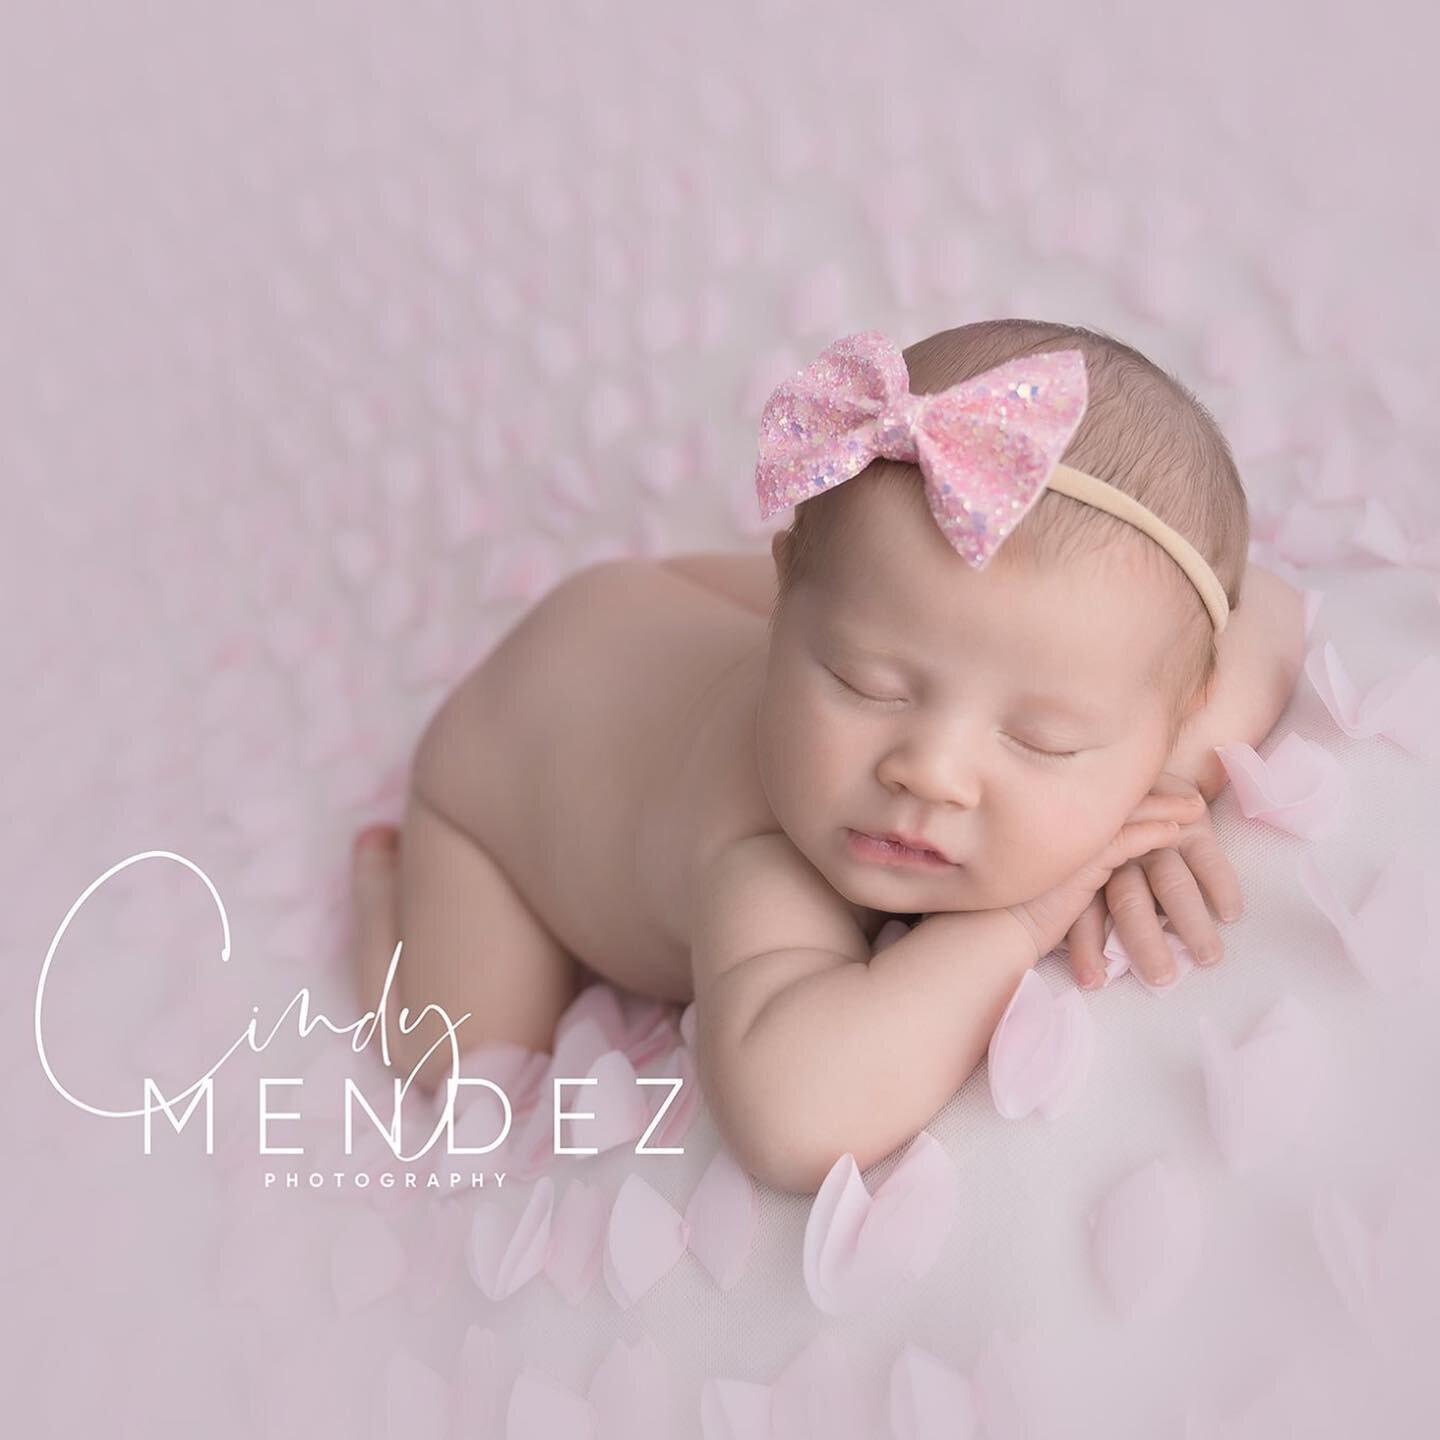 This doll came in when she was three weeks old and did amazing!!! #cindymendezphotography #newbornphotography #newbornphotographer #newbornphotographers #newborn #newborns #baby #babies #newbornpictures #newbornphotos #babyphotography #babyphotograph